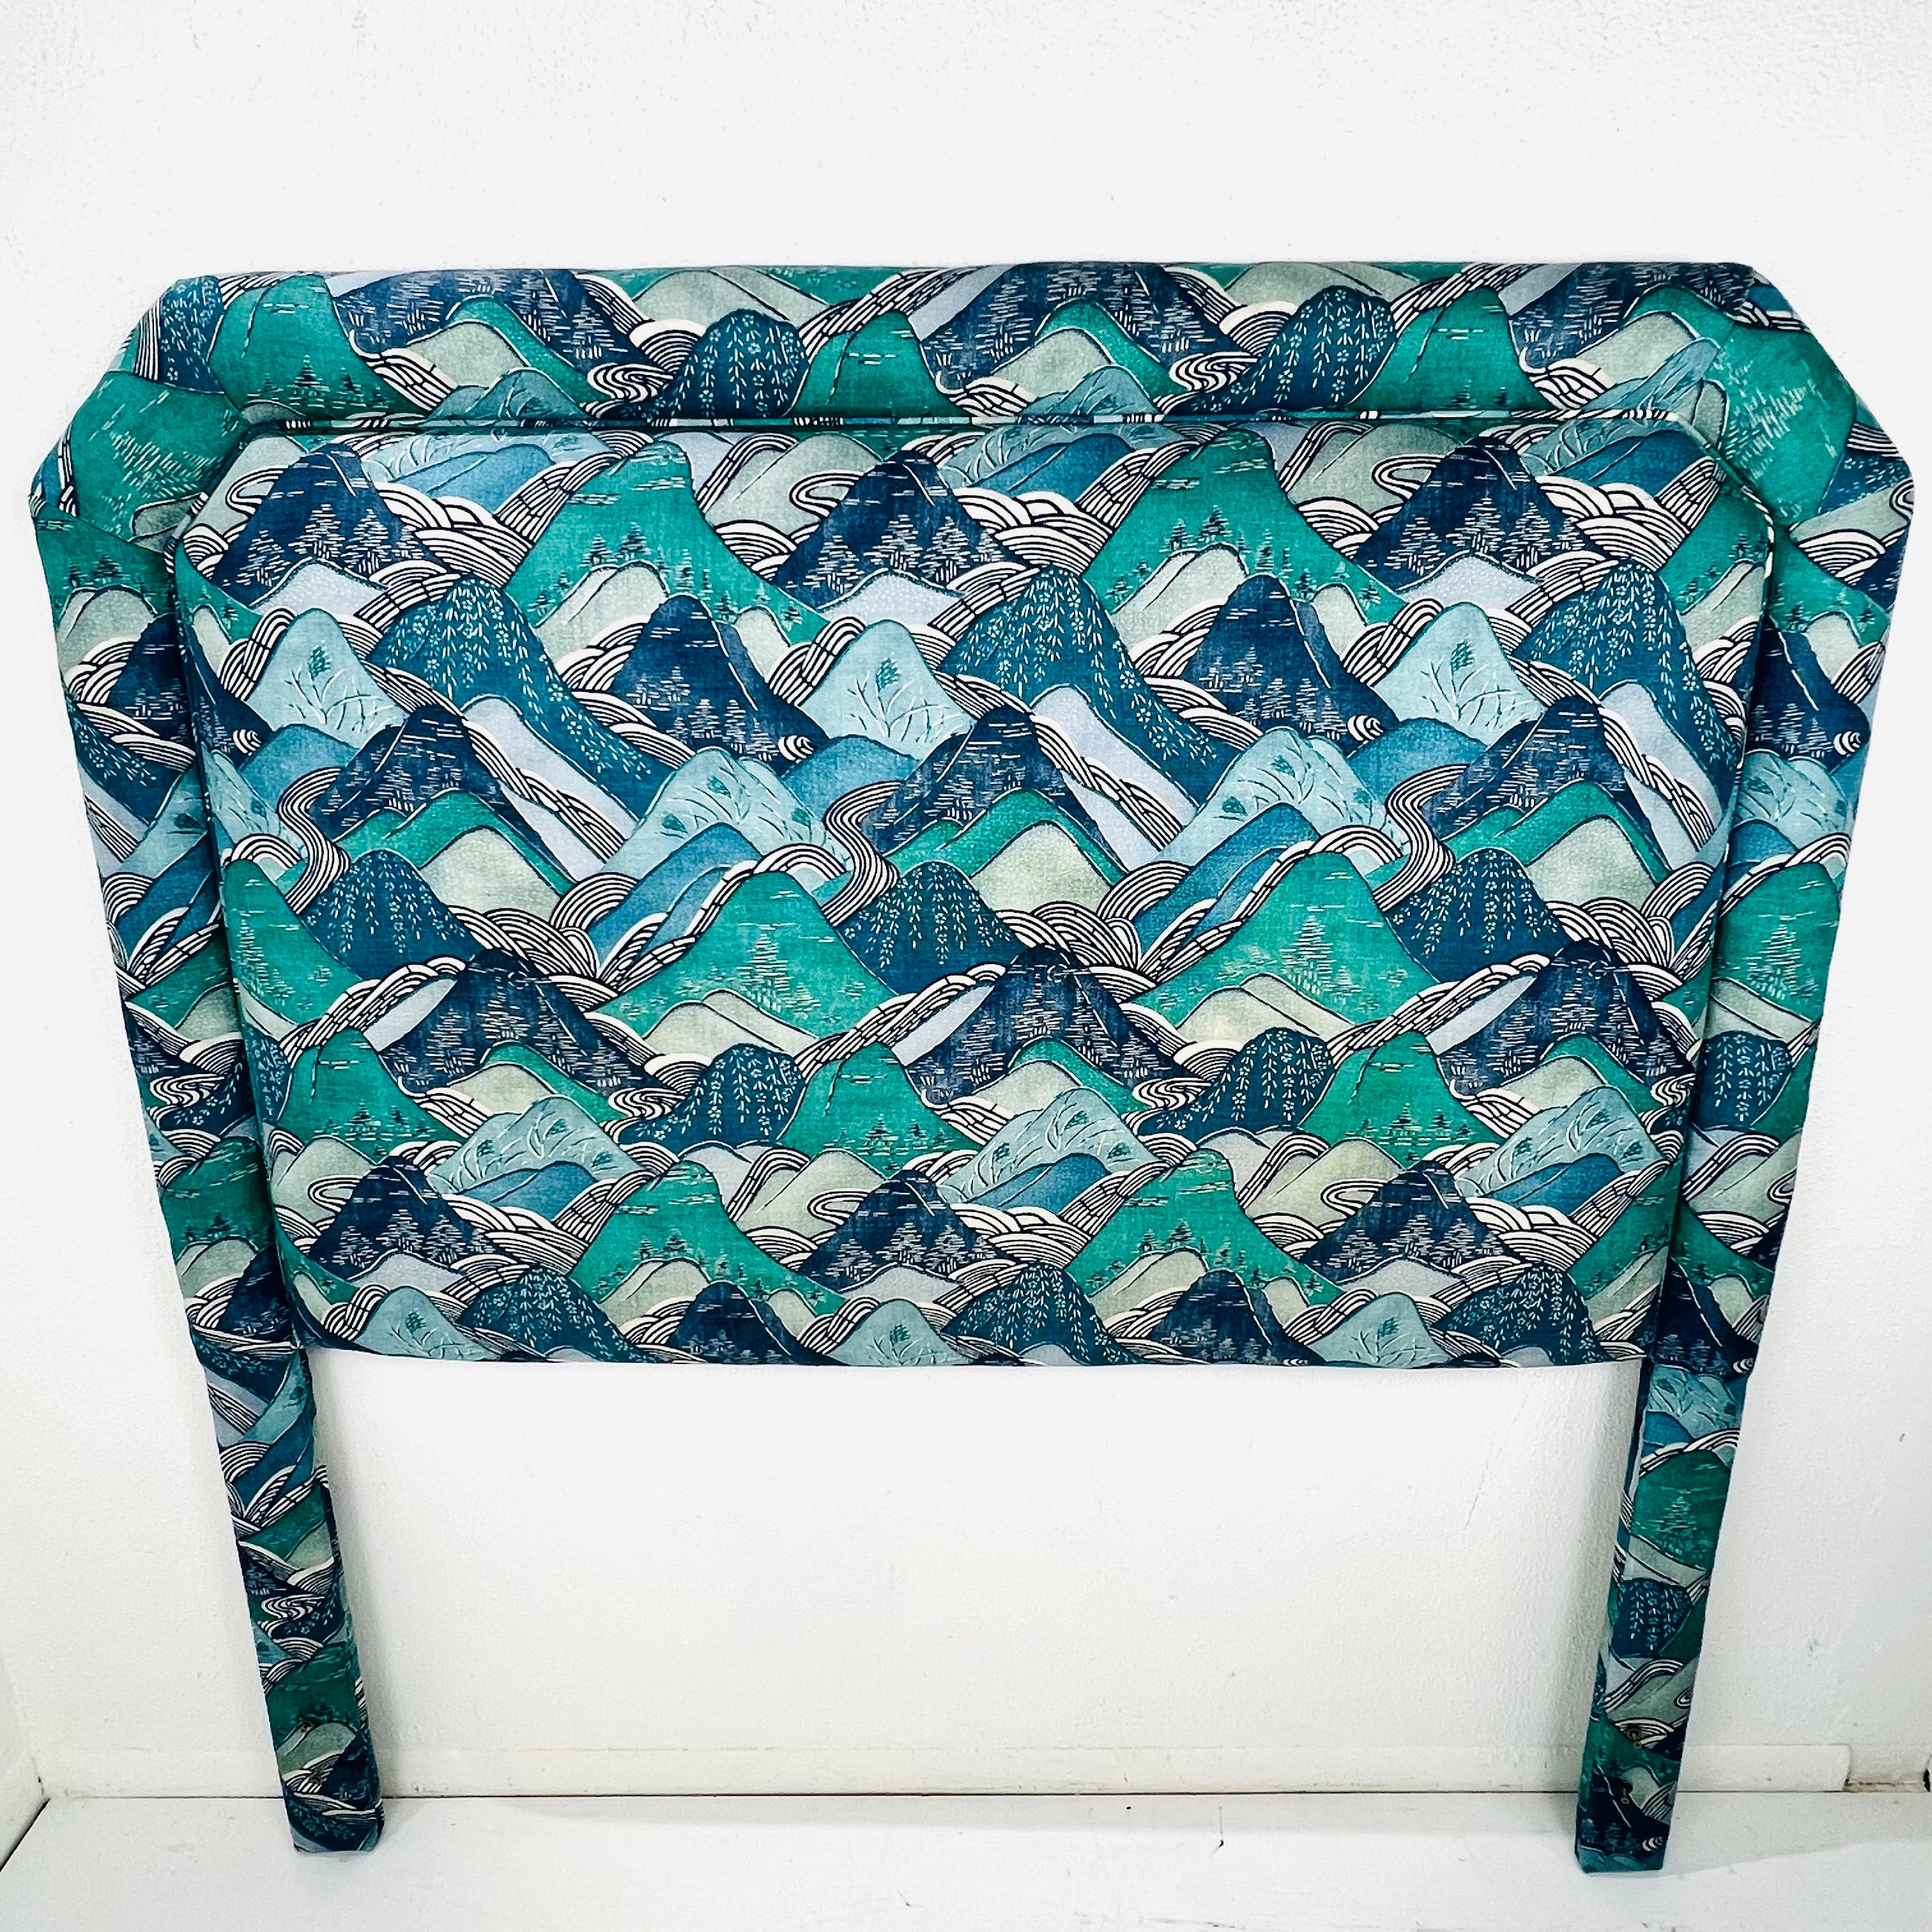 Queen Headboard Upholstered in Teal/Blue Kelly Wearstler Fabric In Good Condition For Sale In Dallas, TX